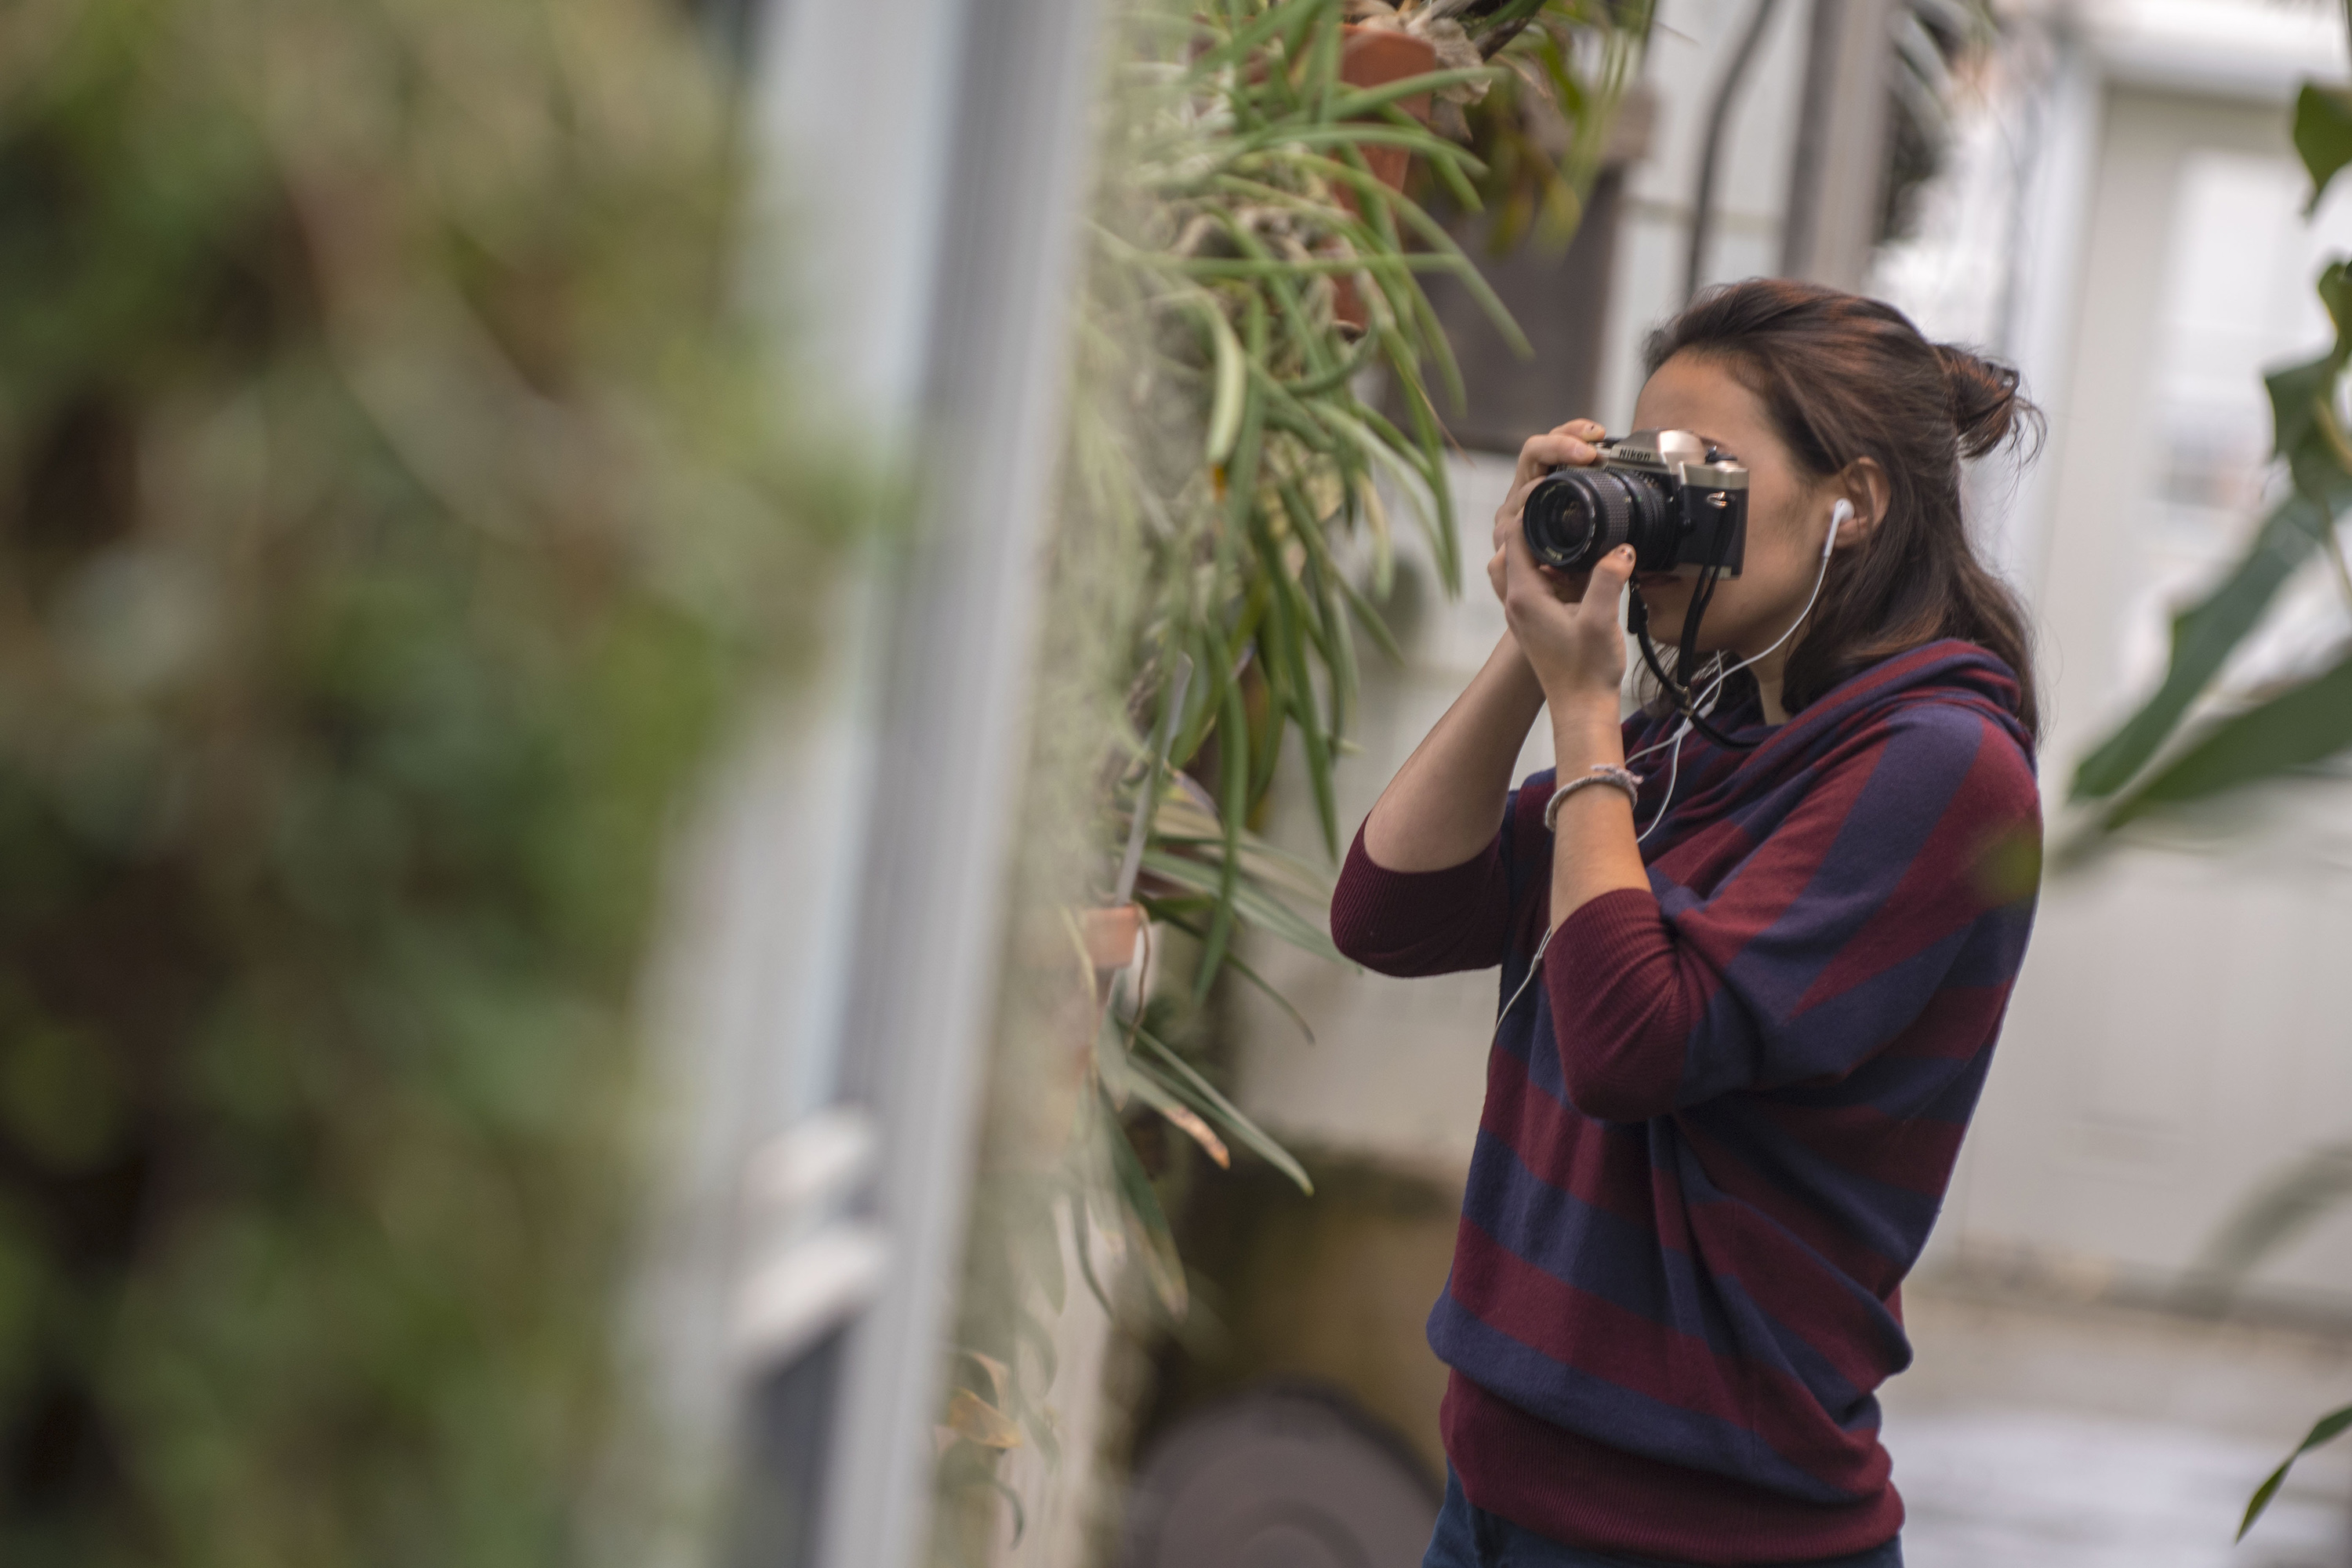 Marissa Aldieri '18 (CLAS), an individualized major, takes photos for Intermediate Photography taught by Kaleigh Rusgrove at the UConn Biodiversity Education and Research Greenhouses on Feb. 12, 2018. (Garrett Spahn '18 (CLAS)/UConn Photo)